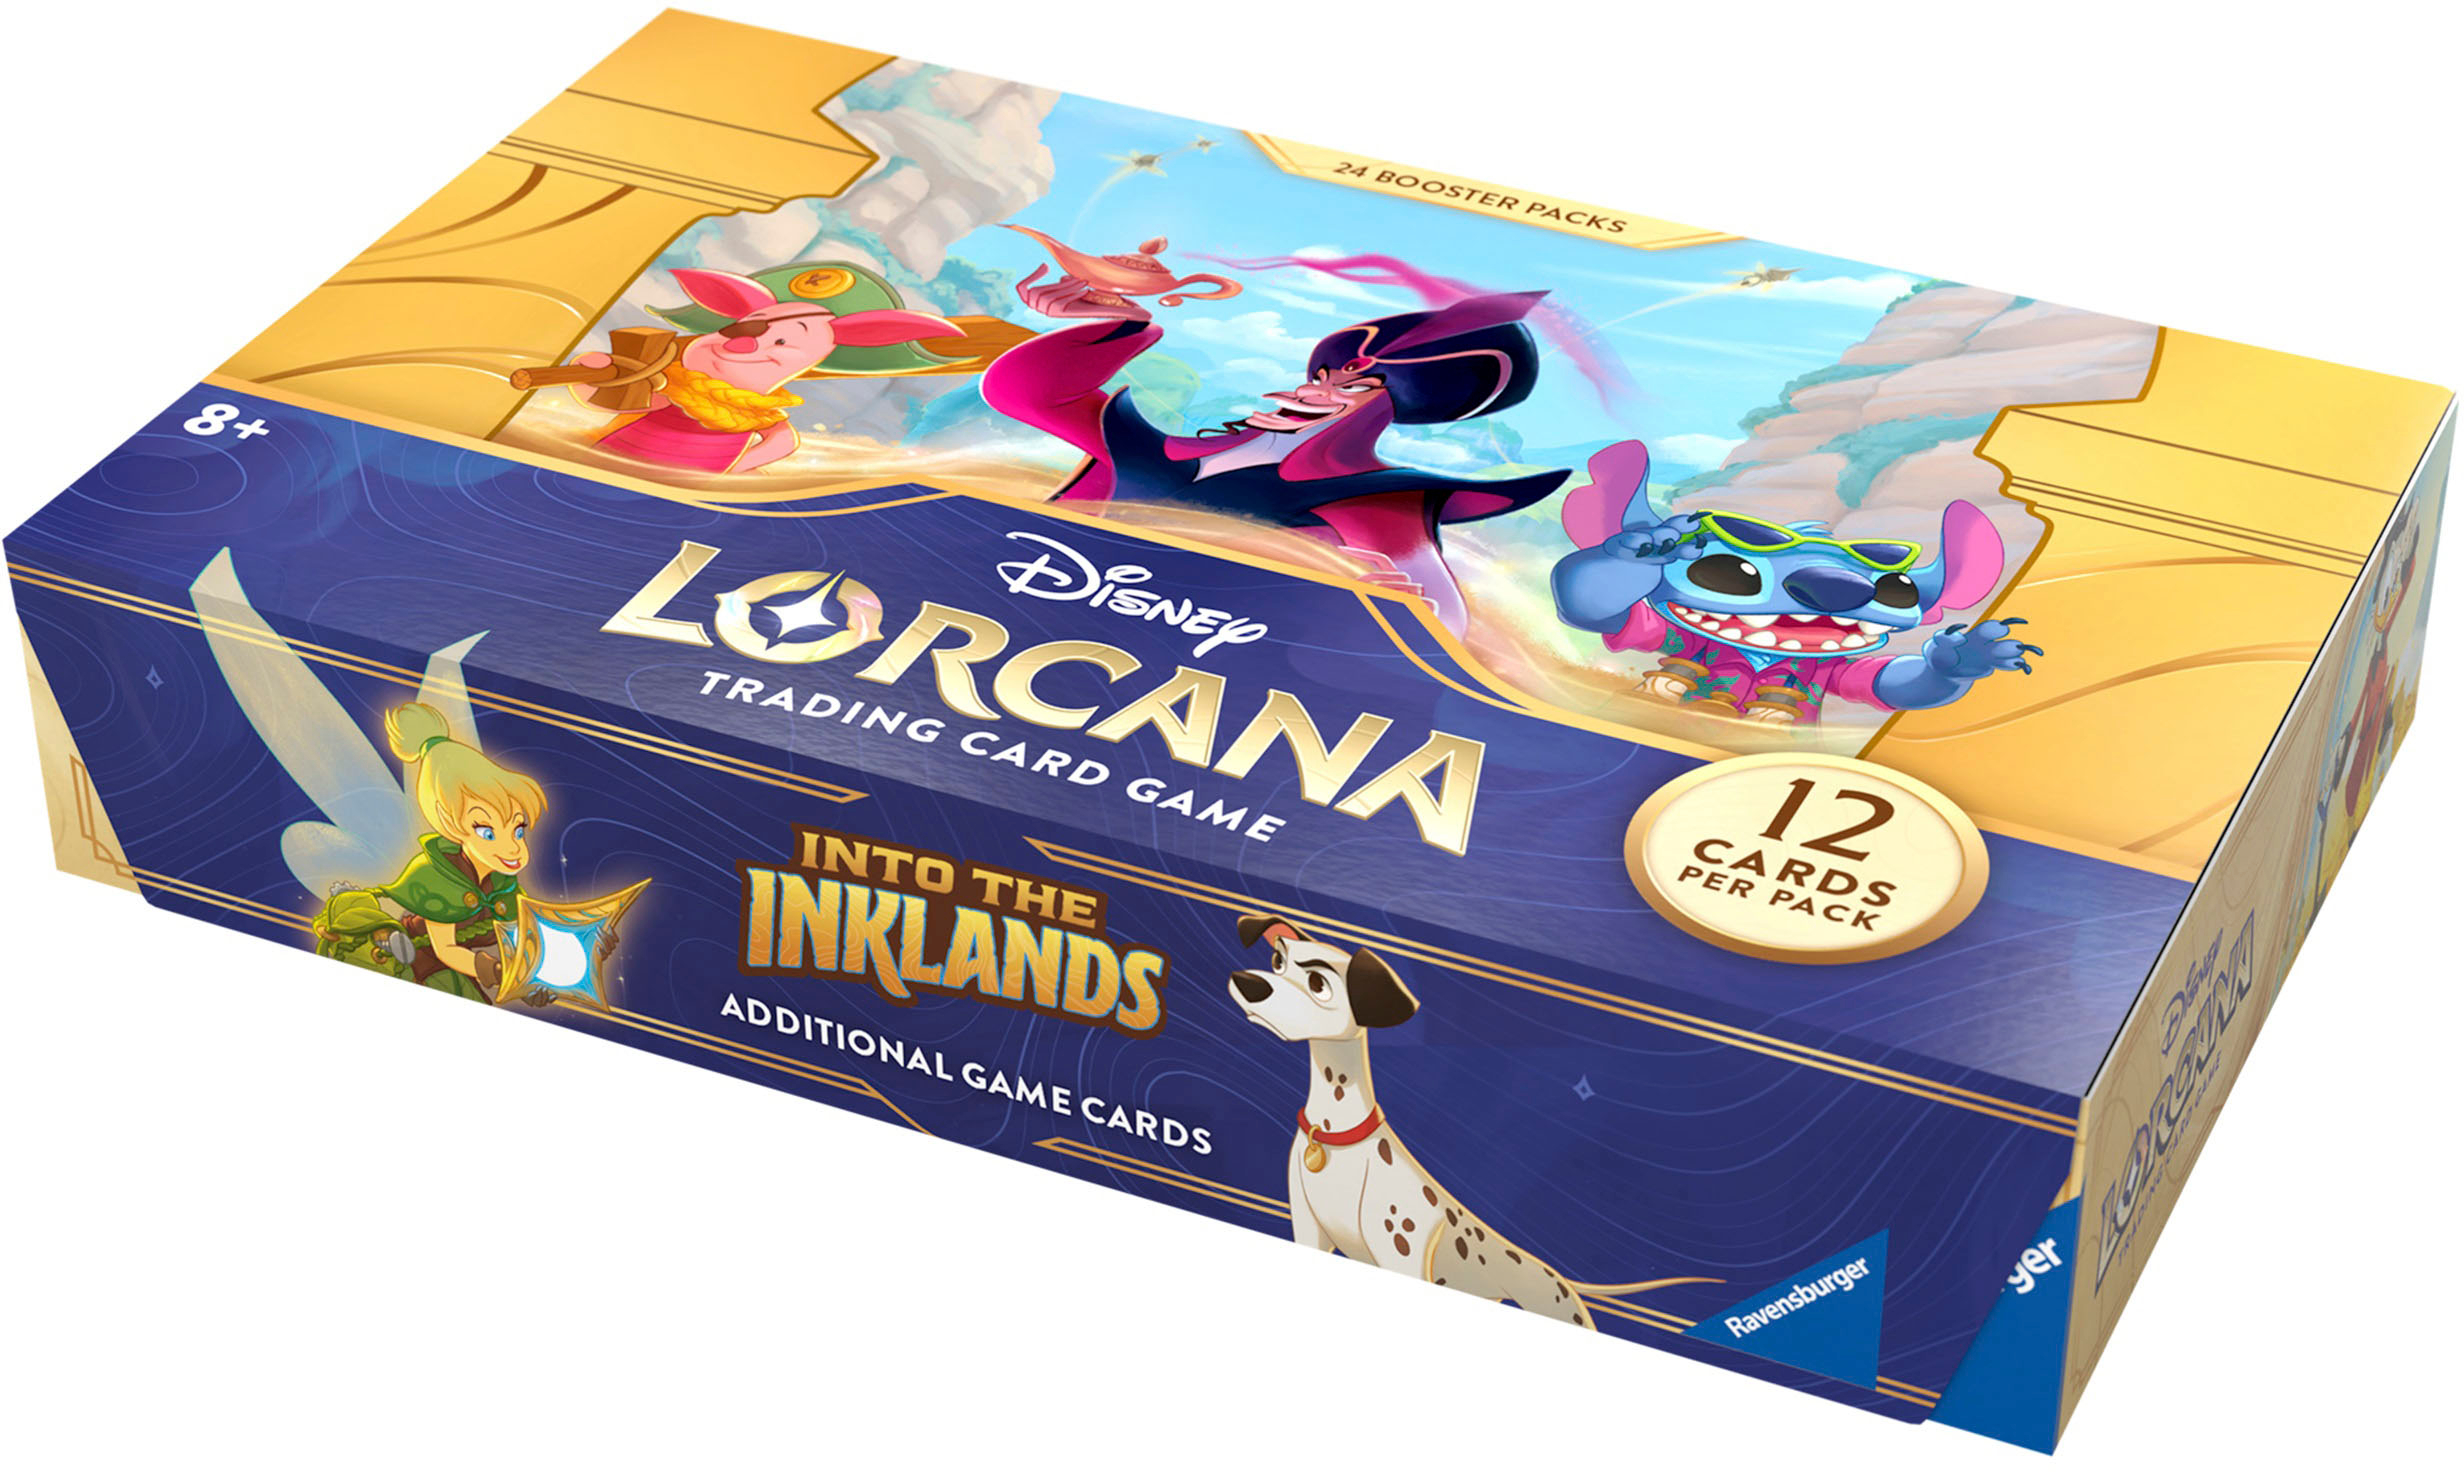 Disney Lorcana Booster Pack Display - Canada In Stock Availability and